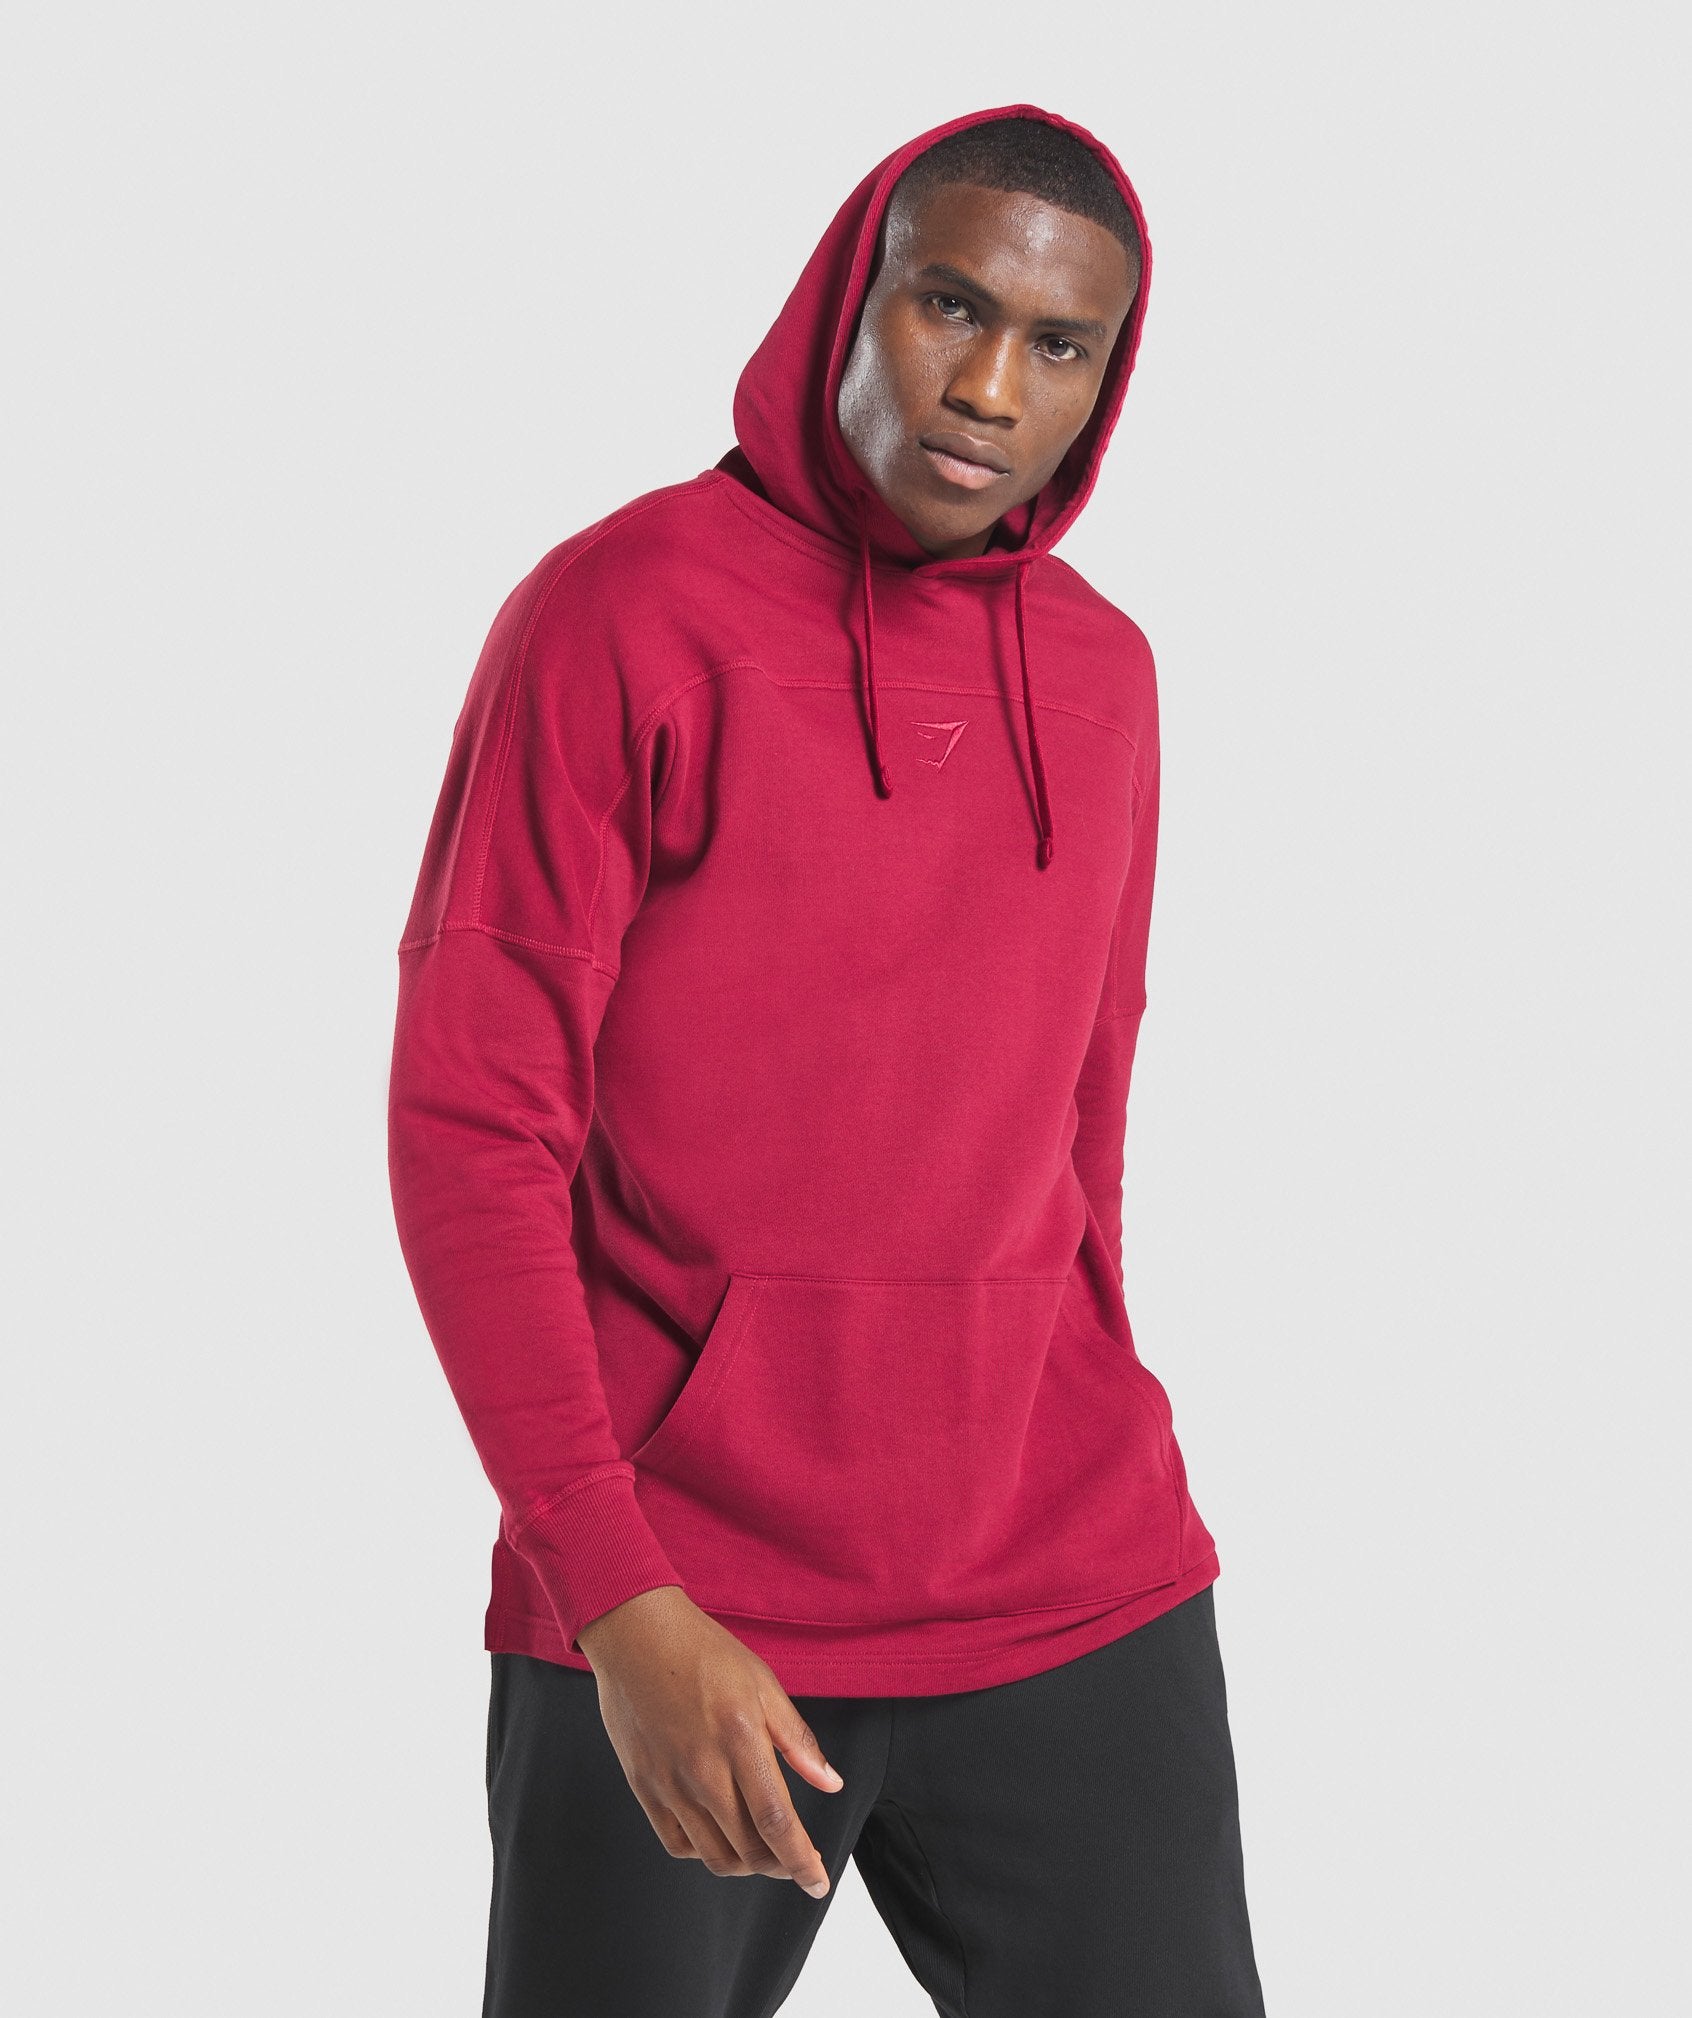 Compound Hoodie in Burgundy - view 1